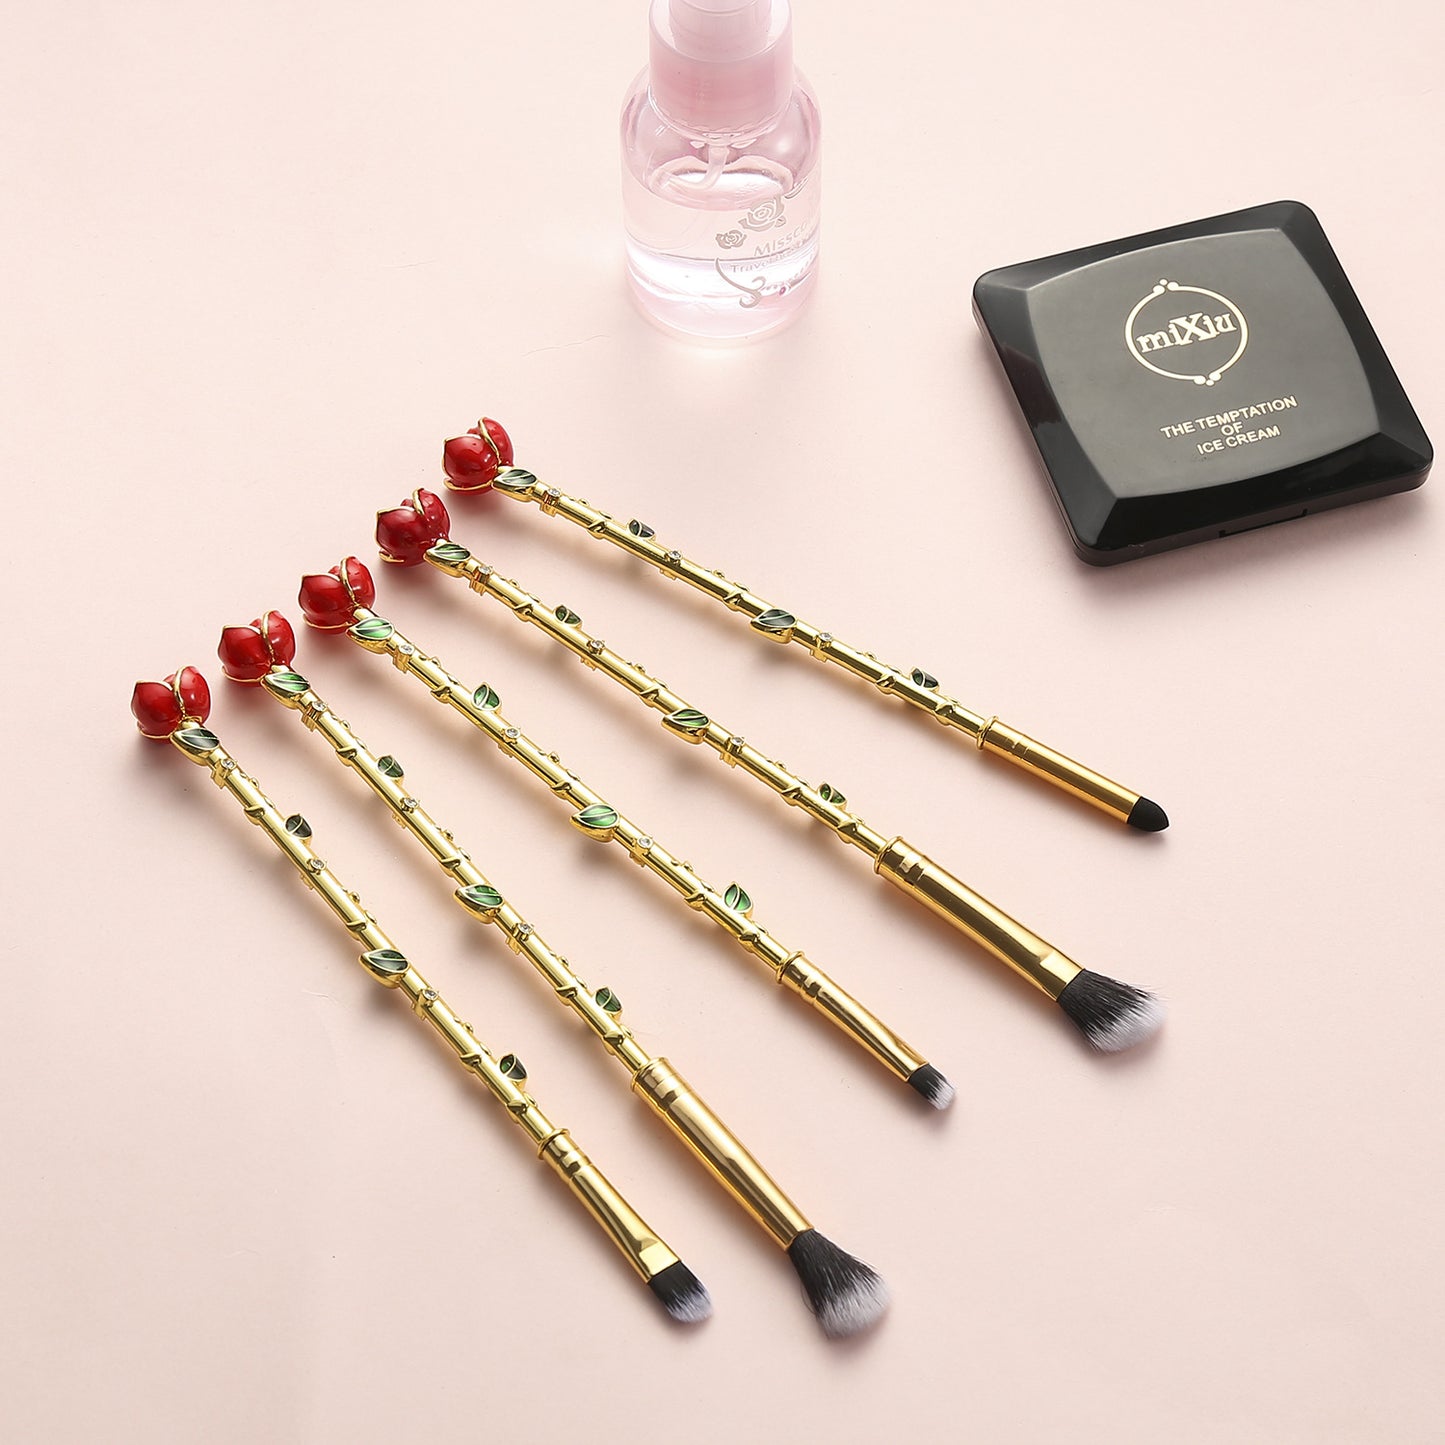 Midi Fox Rose Makeup Brush Tool Little Prince Around Beauty and the Beast Valentine's Day Gift - B&H